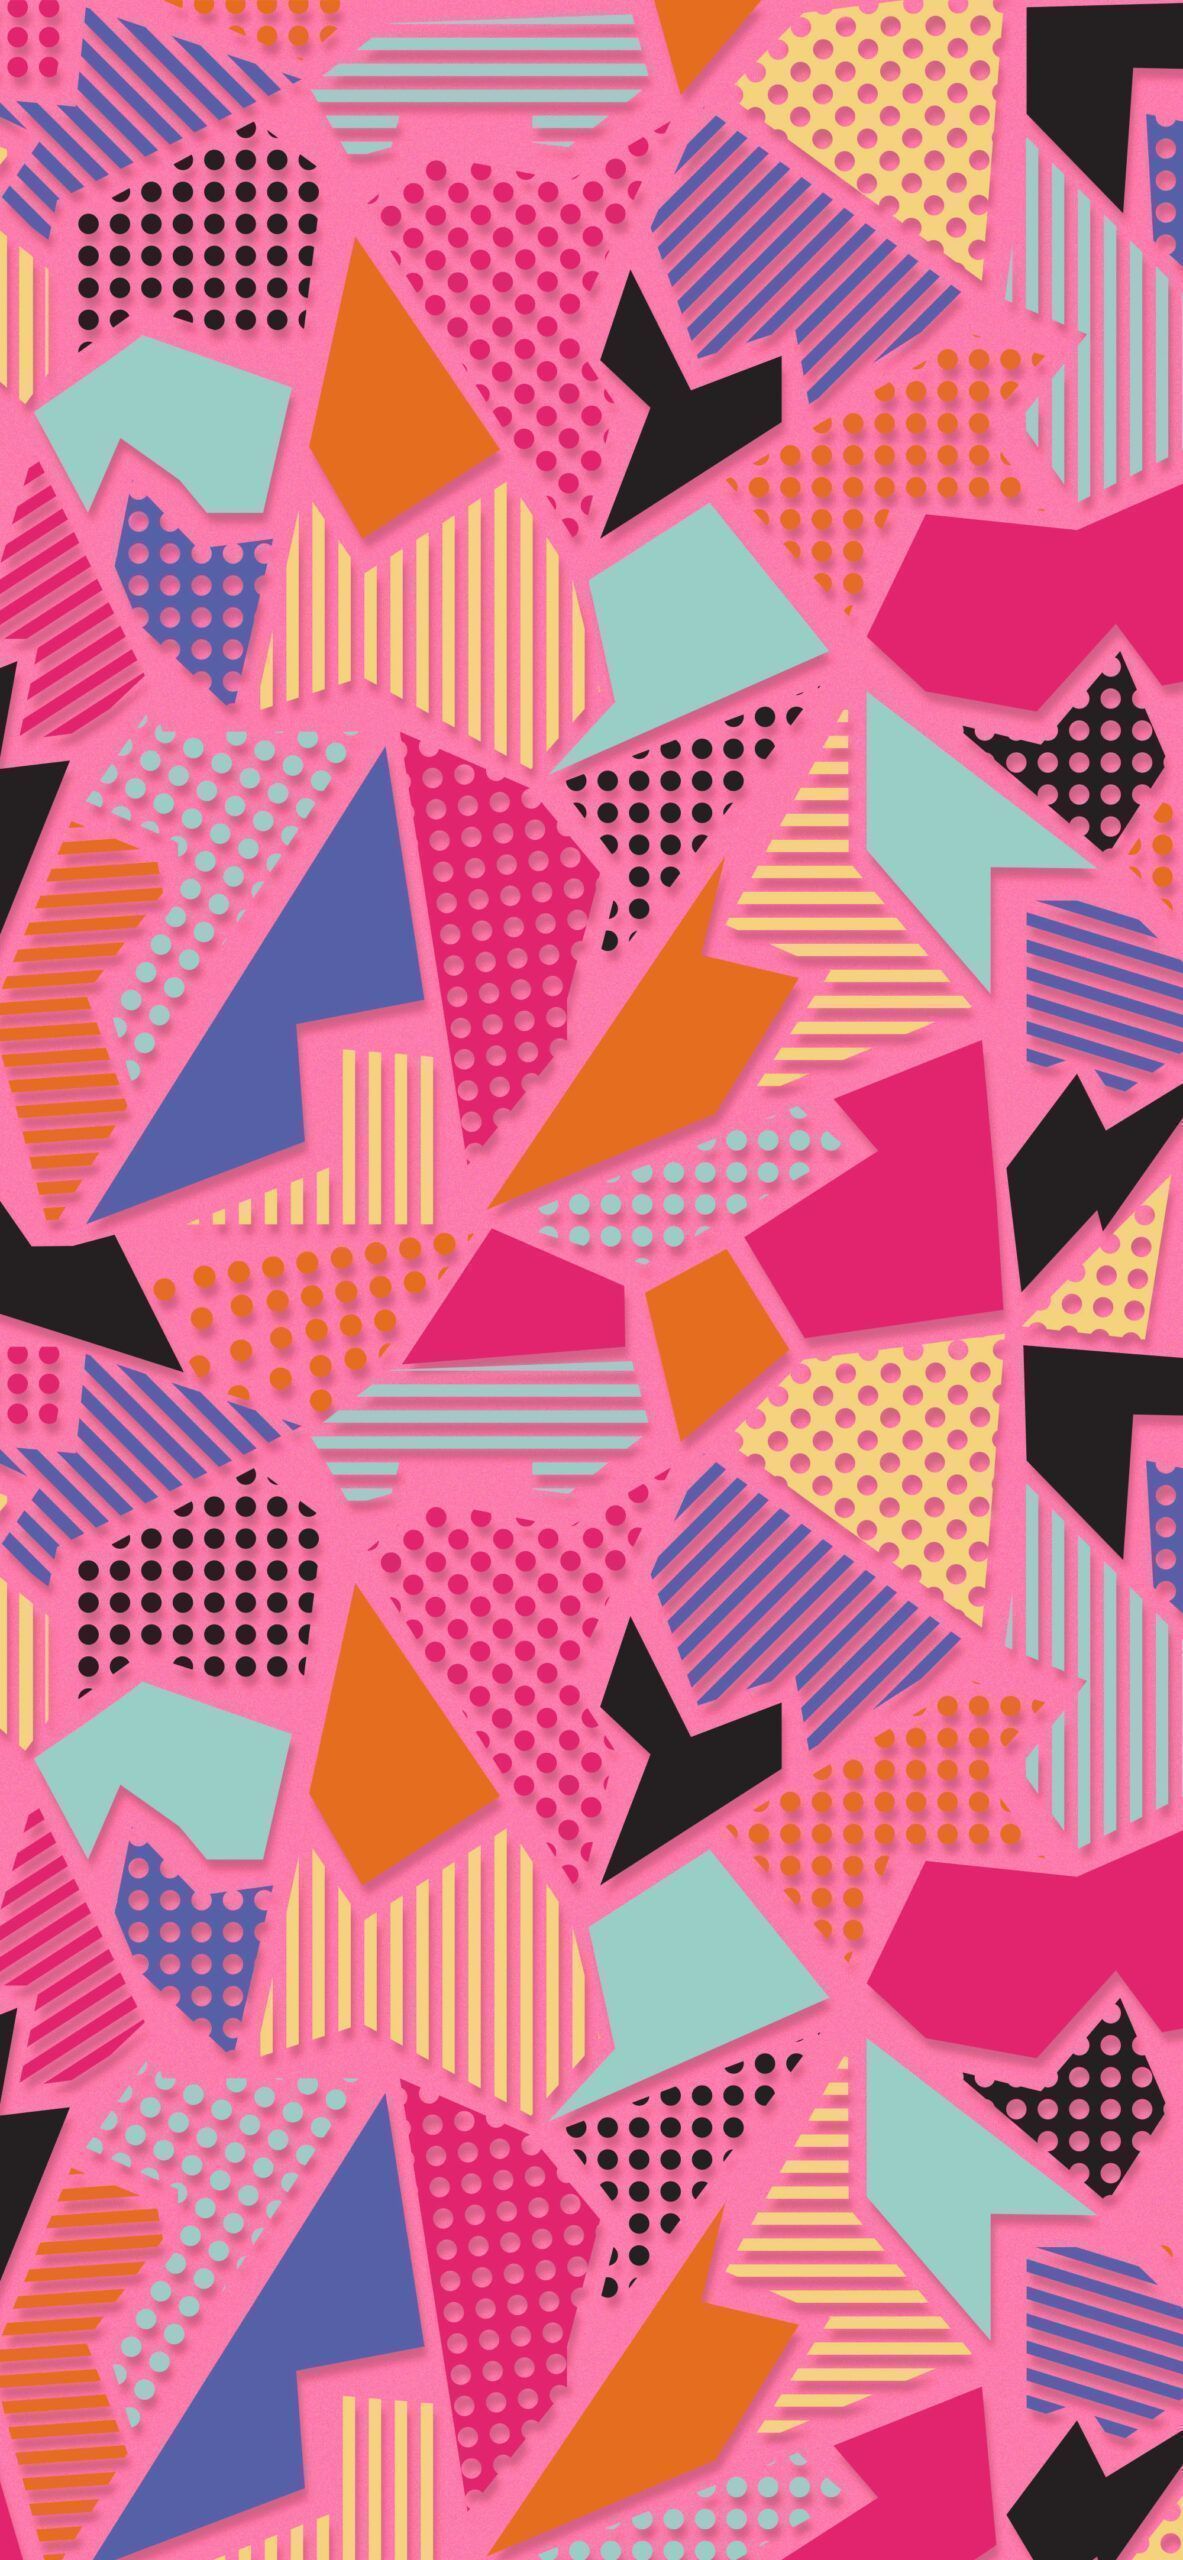 A pink wallpaper with colorful geometric shapes. - Geometry